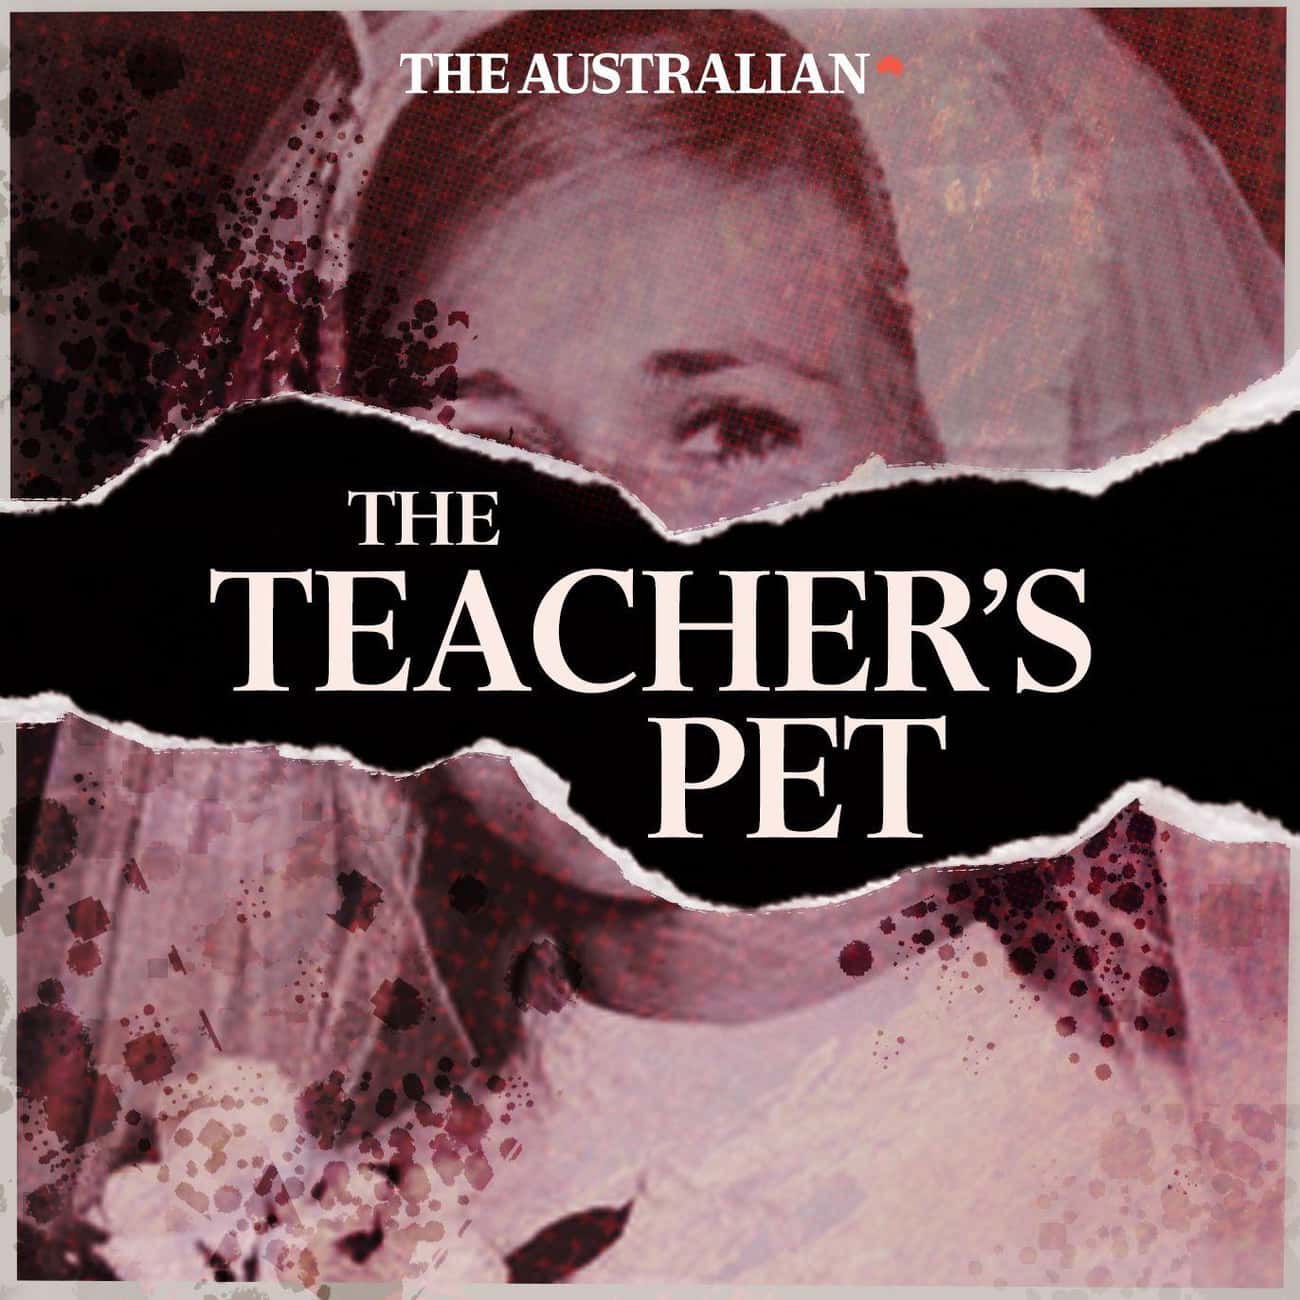 'The Teacher's Pet' Interviewed Witnesses That Helped Lead To The Arrest Of Lyn Dawson's Murderer